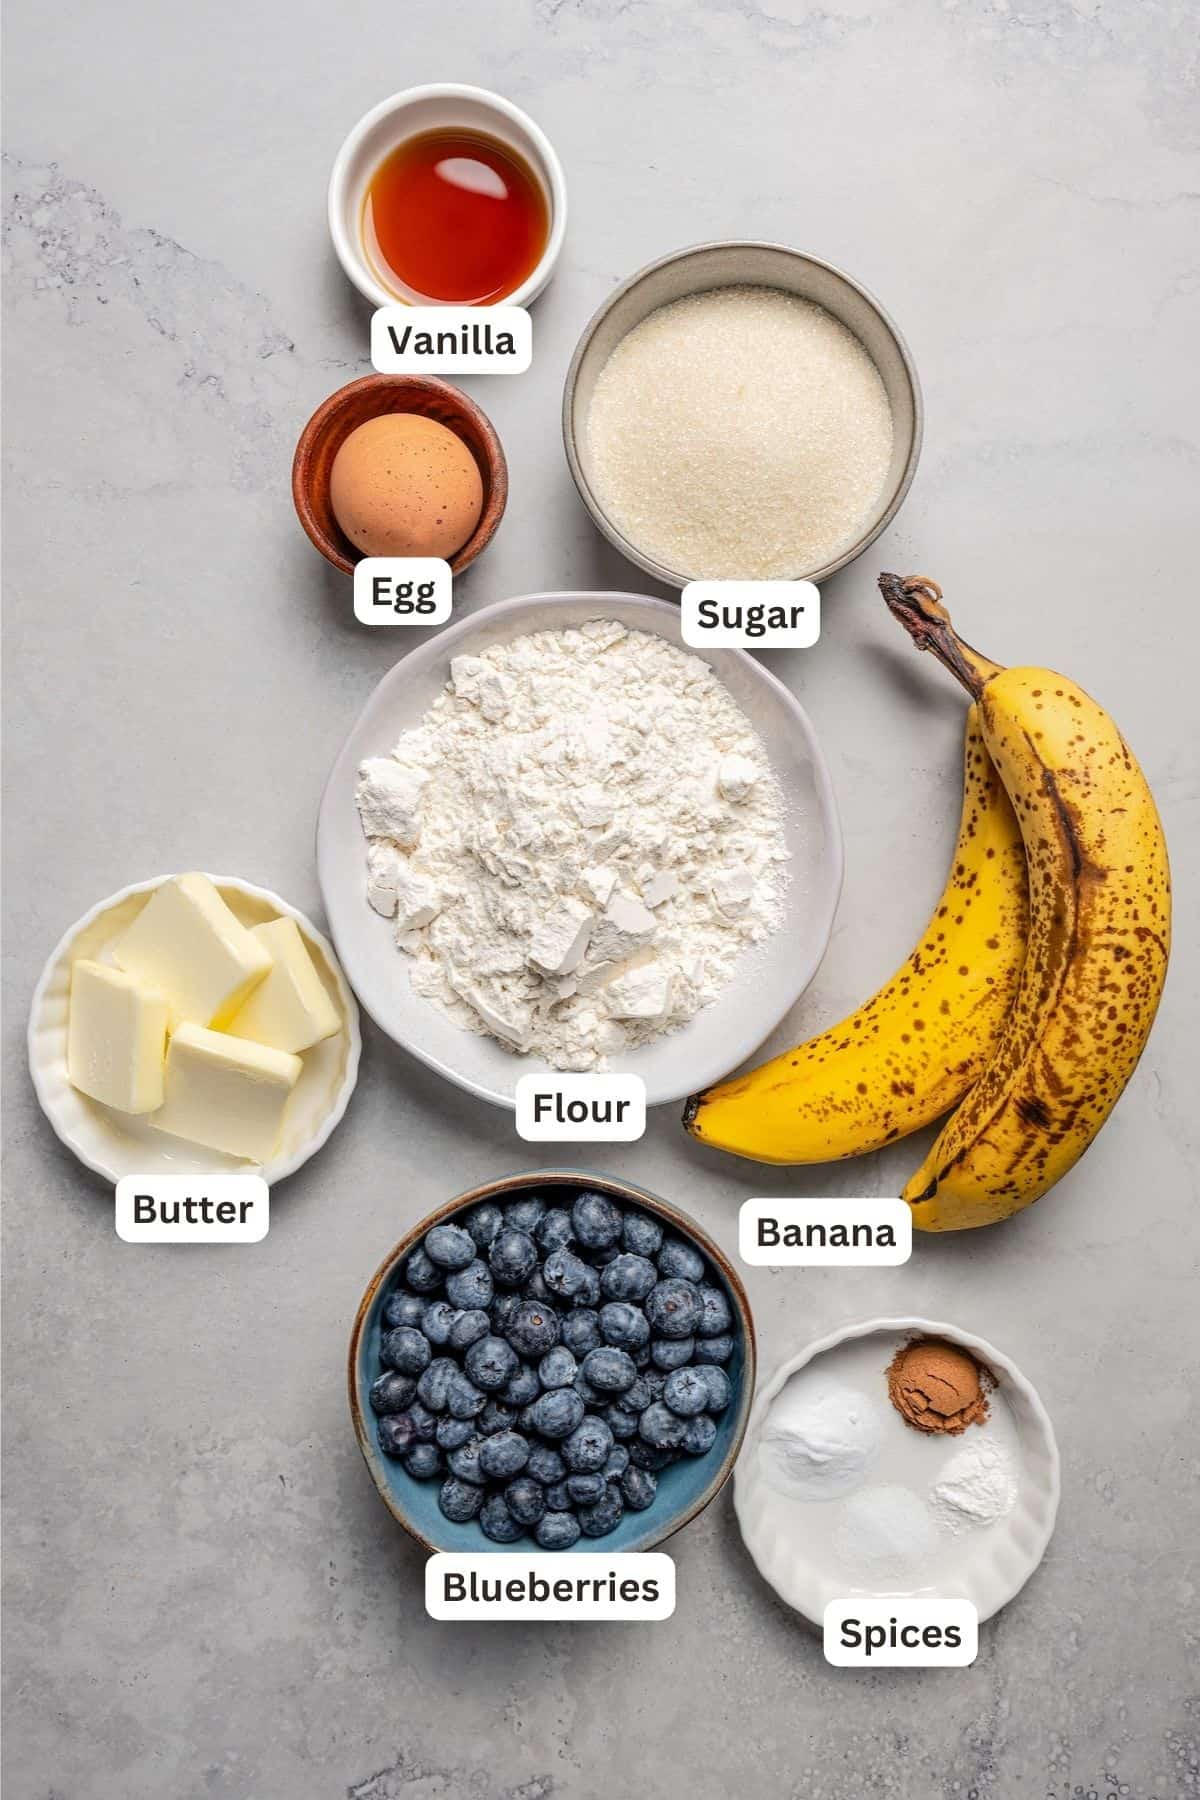 Ingredients for Blueberry Banana Bread.